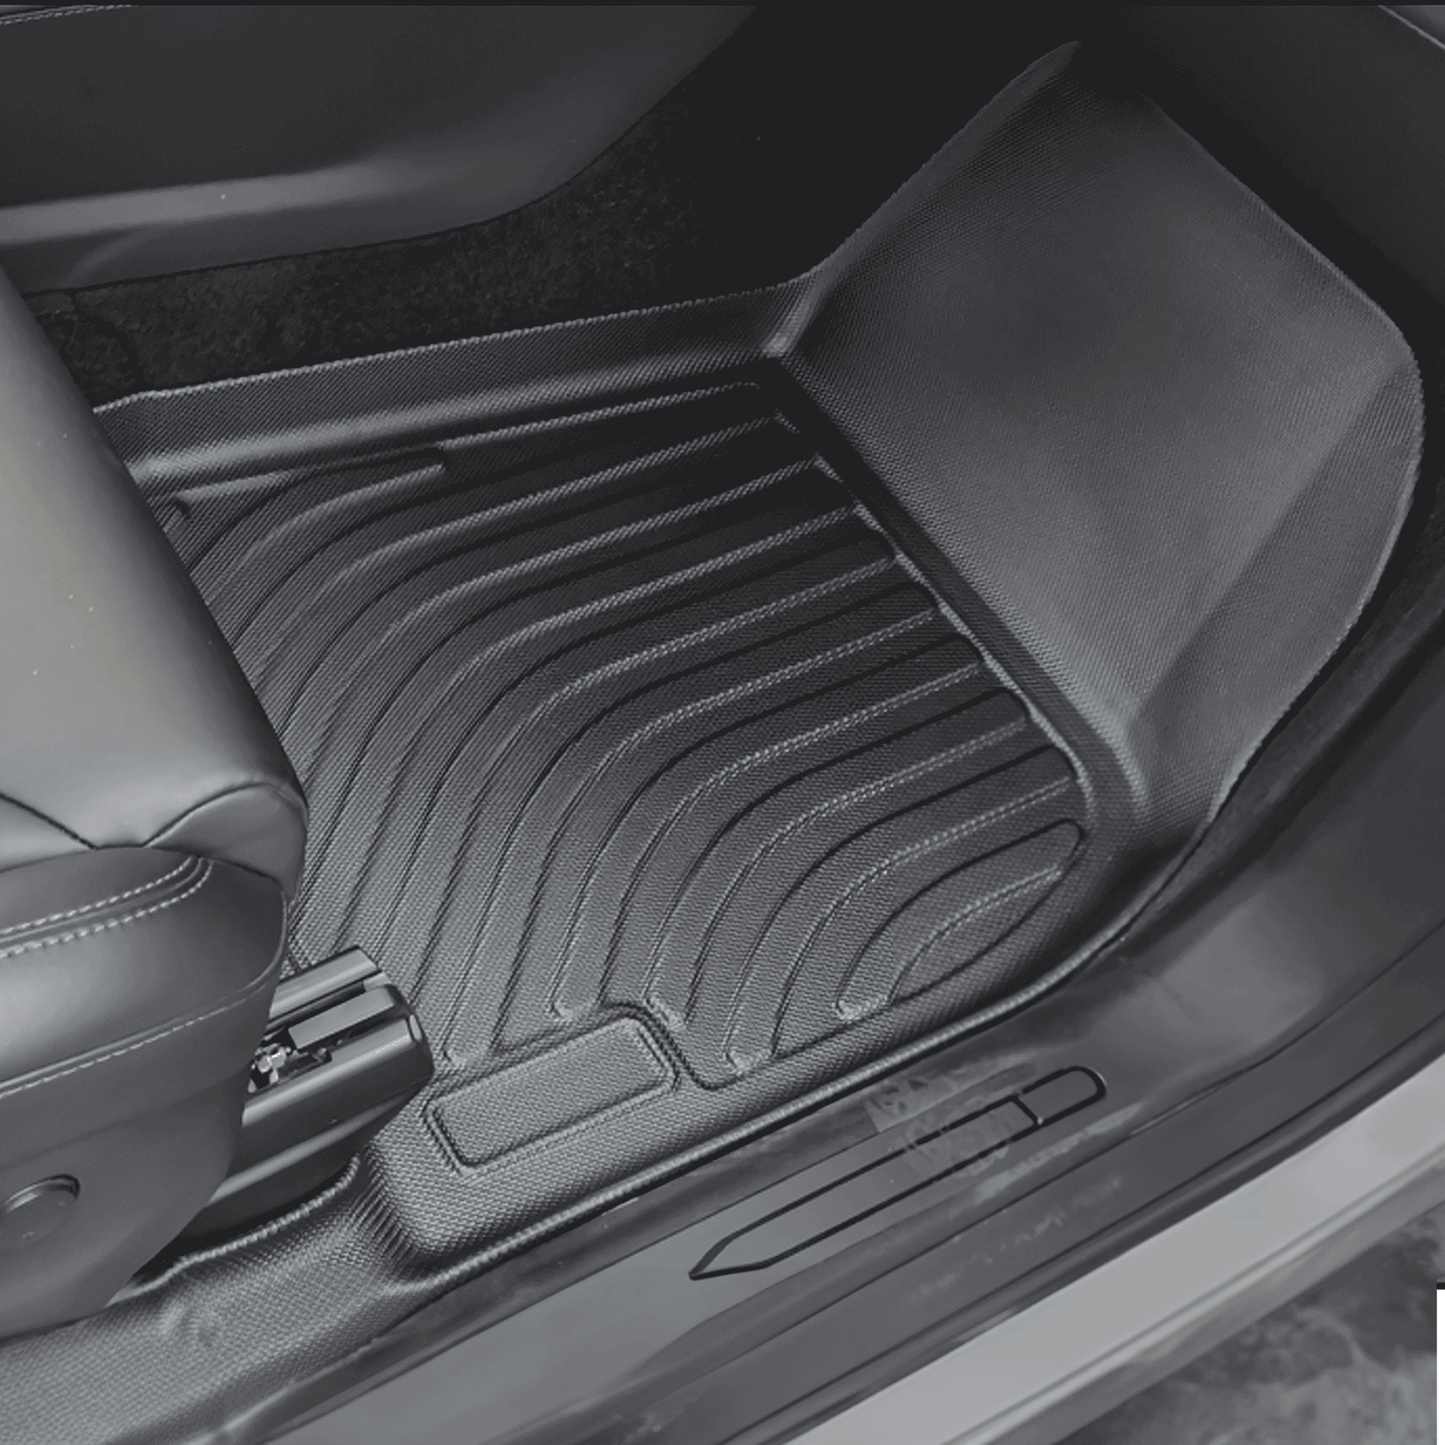 2021-2023 All Weather Floor Mats For Model X (5 Seater)